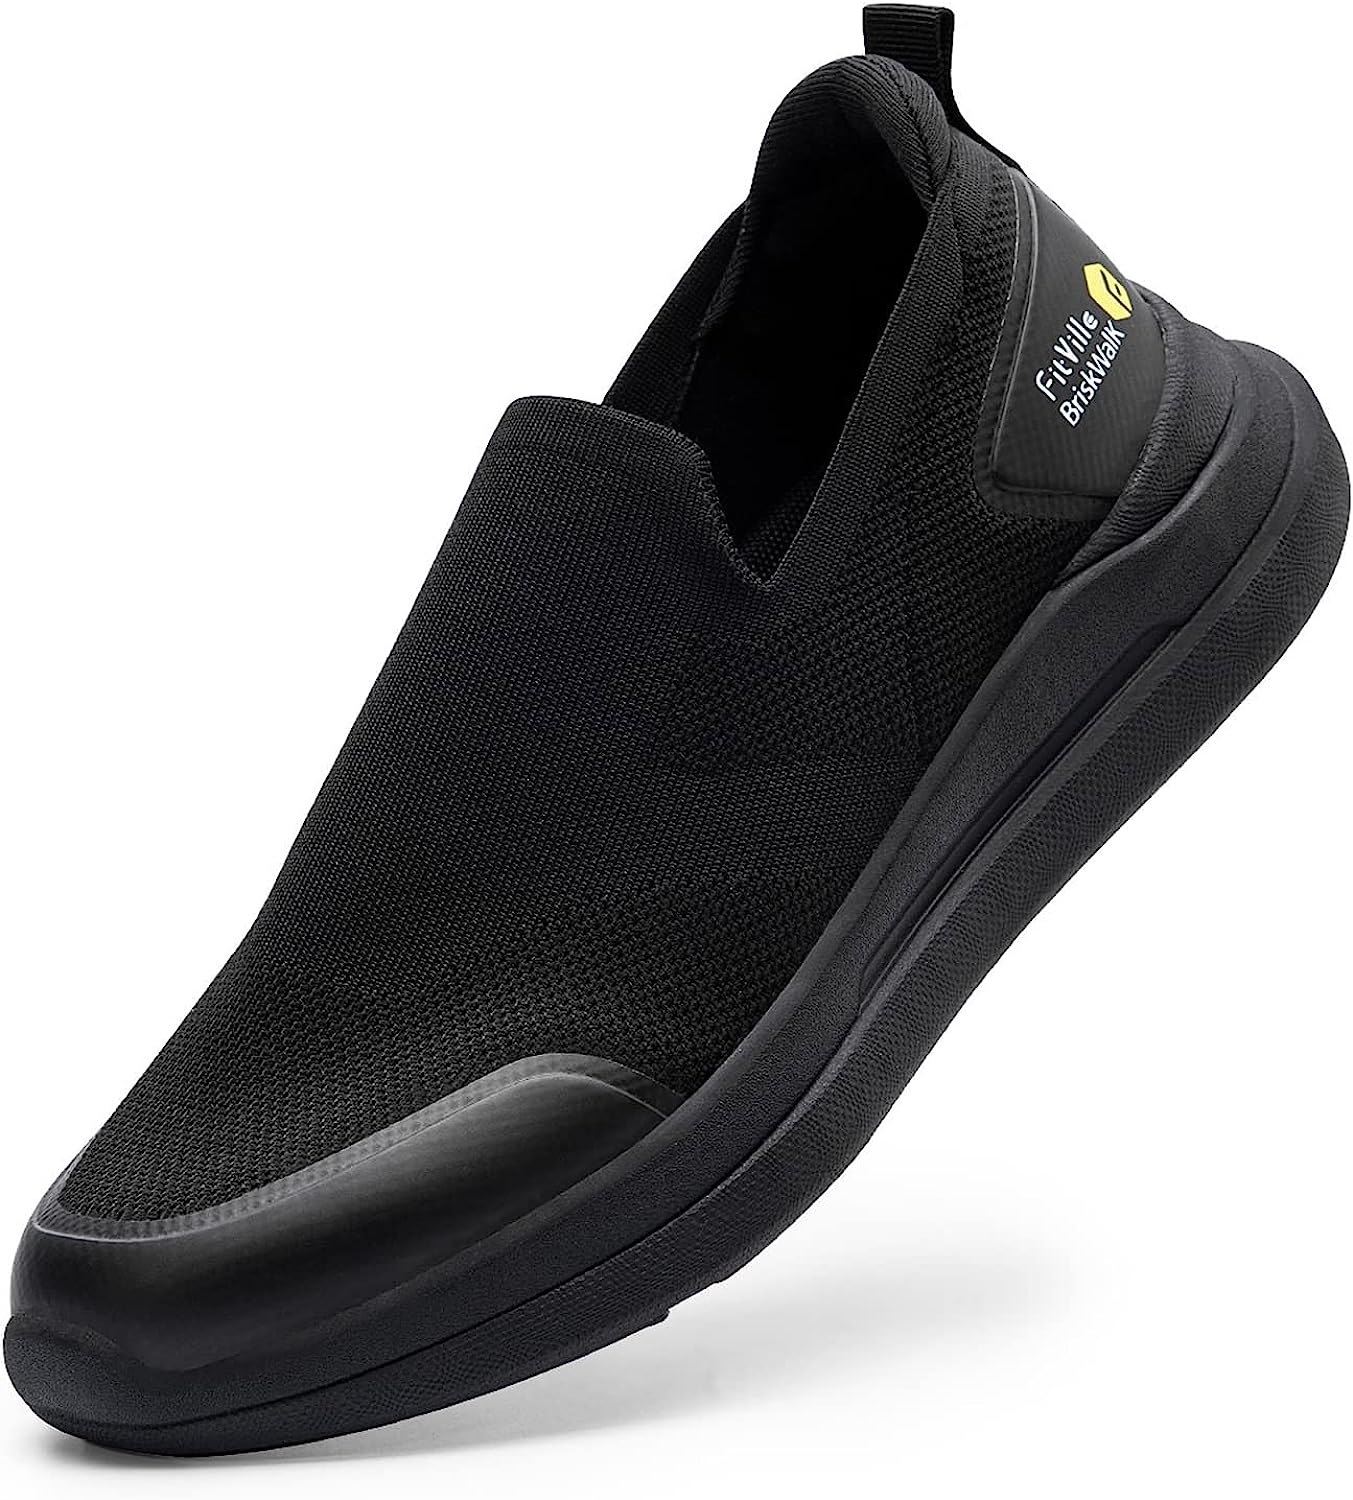 FitVille Plantar Fasciitis Shoes for Men Extra Wide [...]